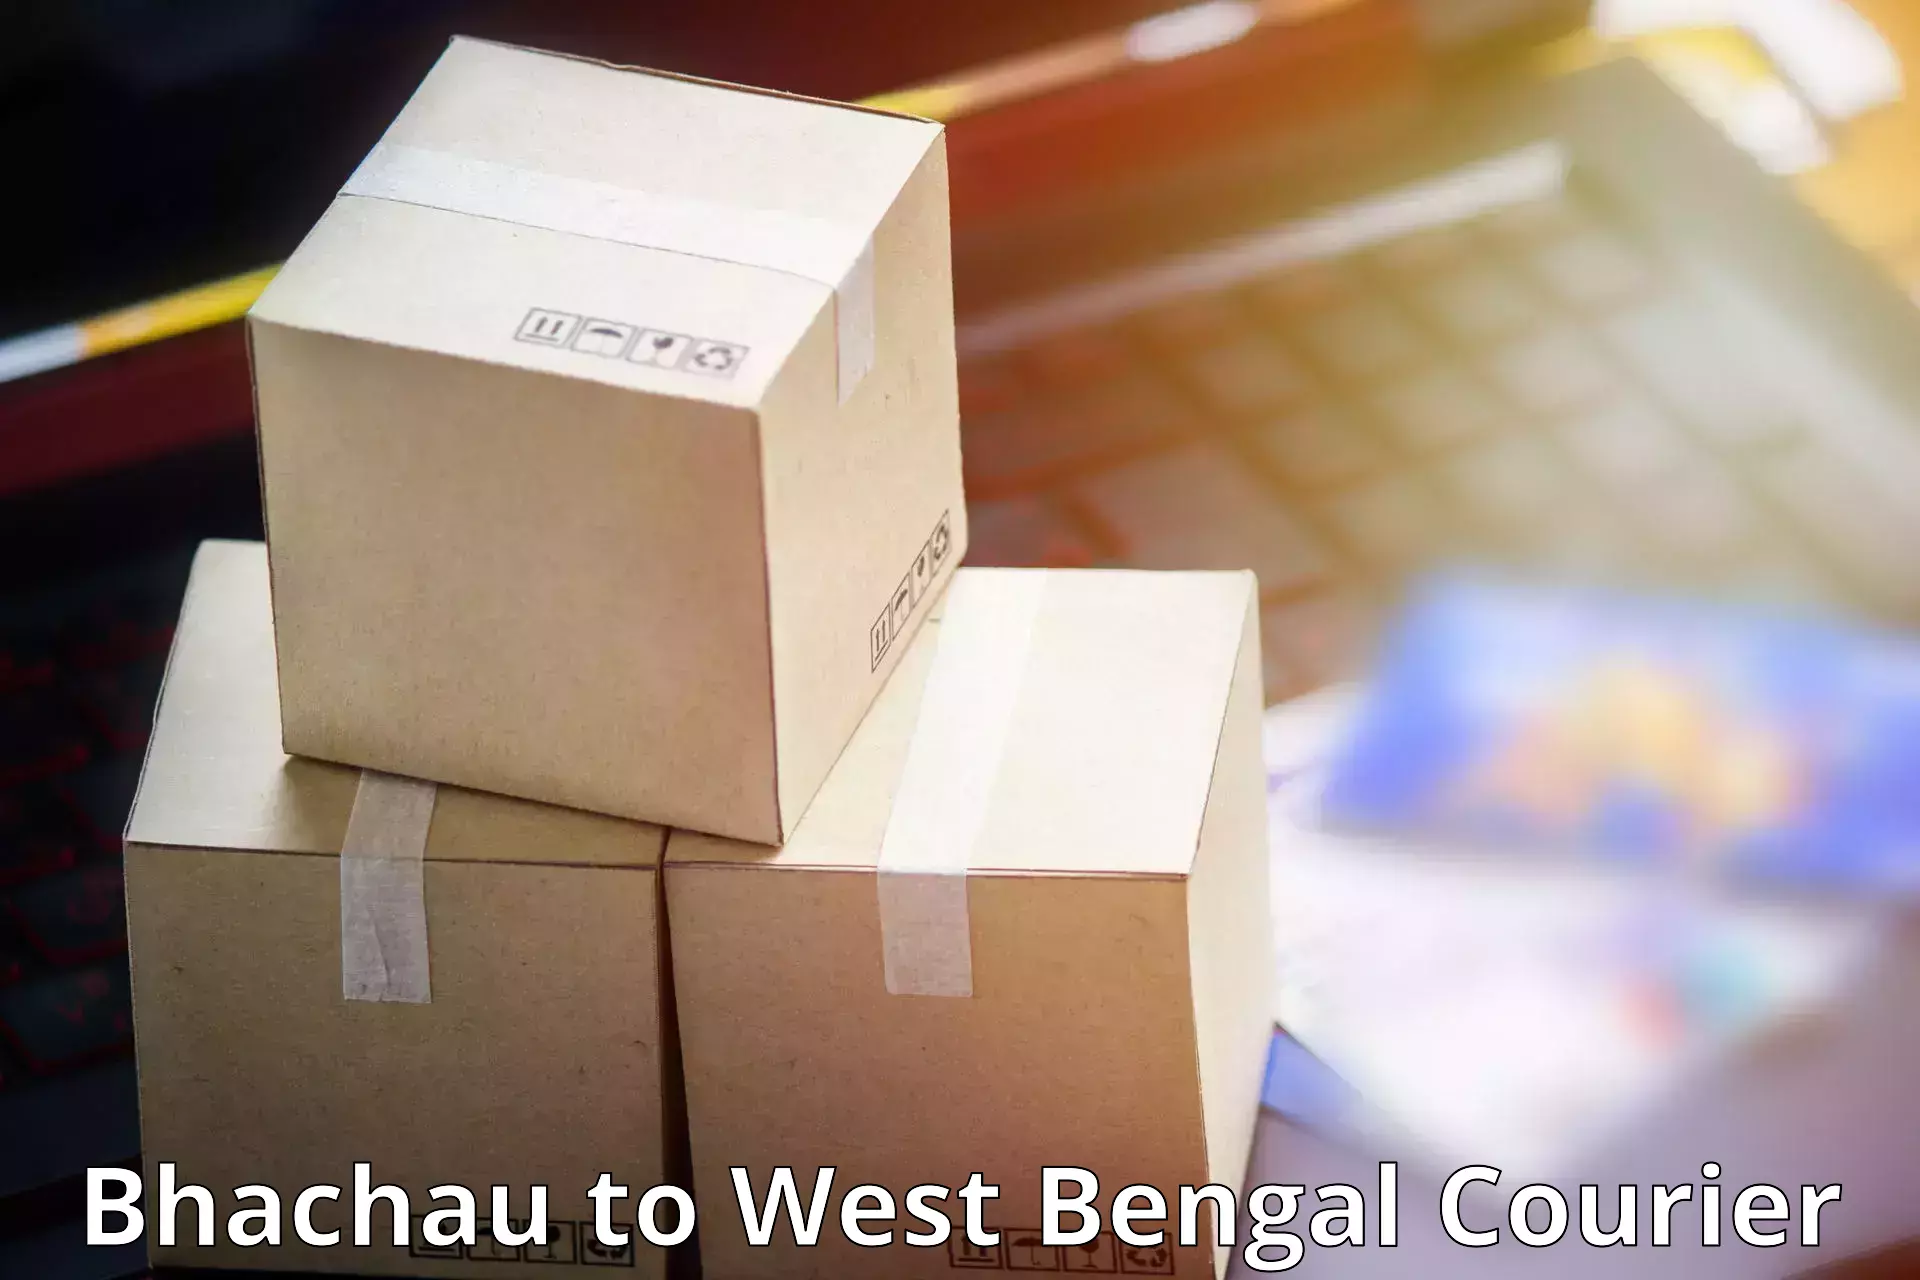 Automated parcel services Bhachau to Badkulla